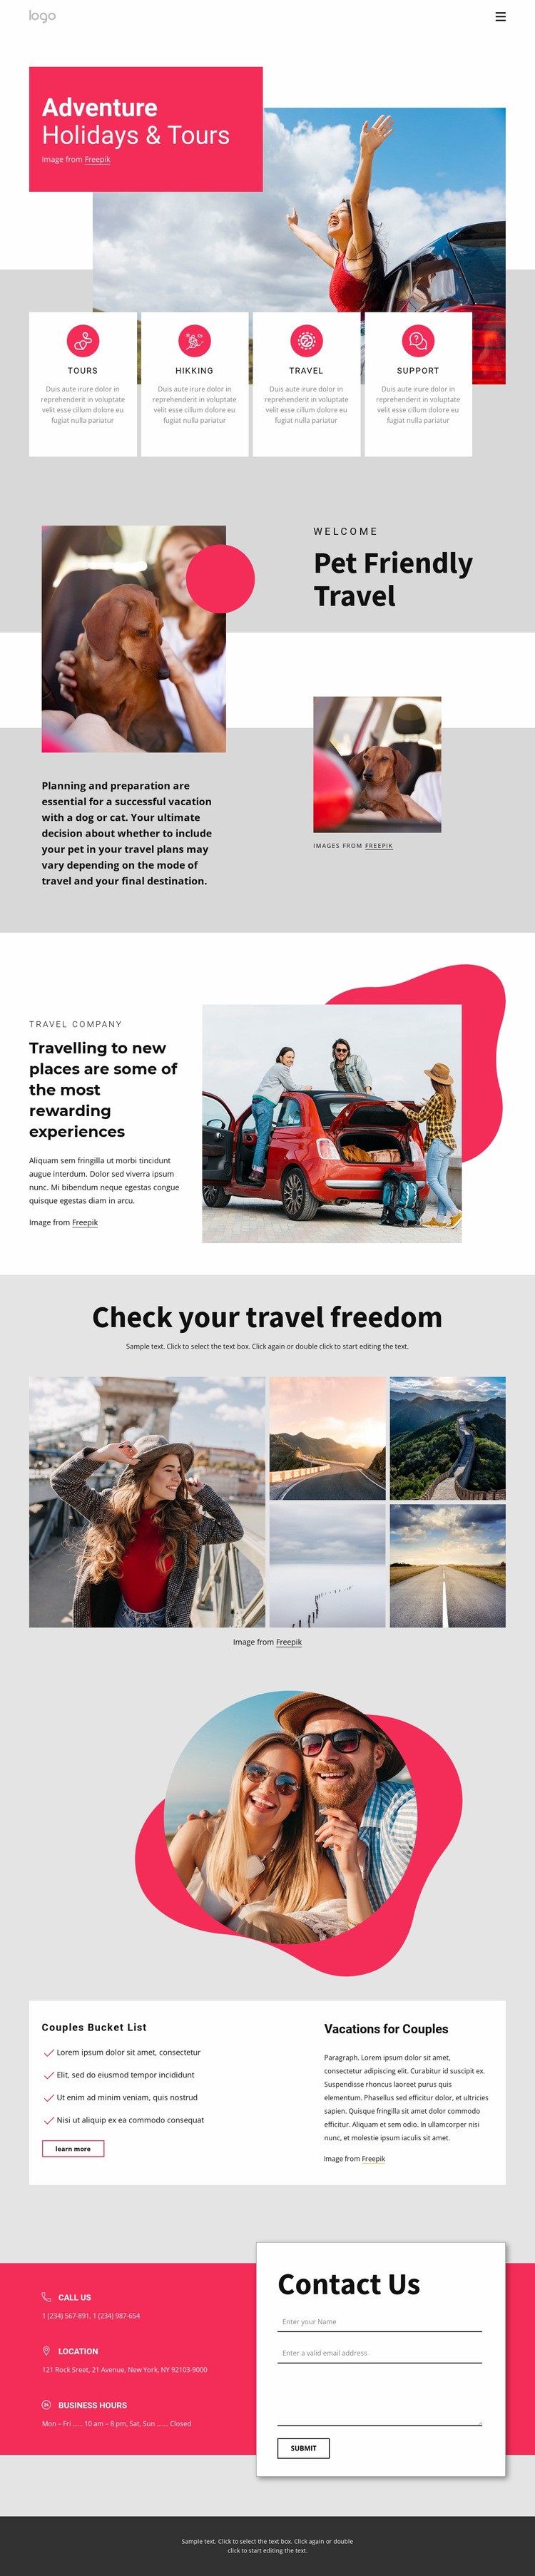 Adventure holidays and tours Webflow Template Alternative